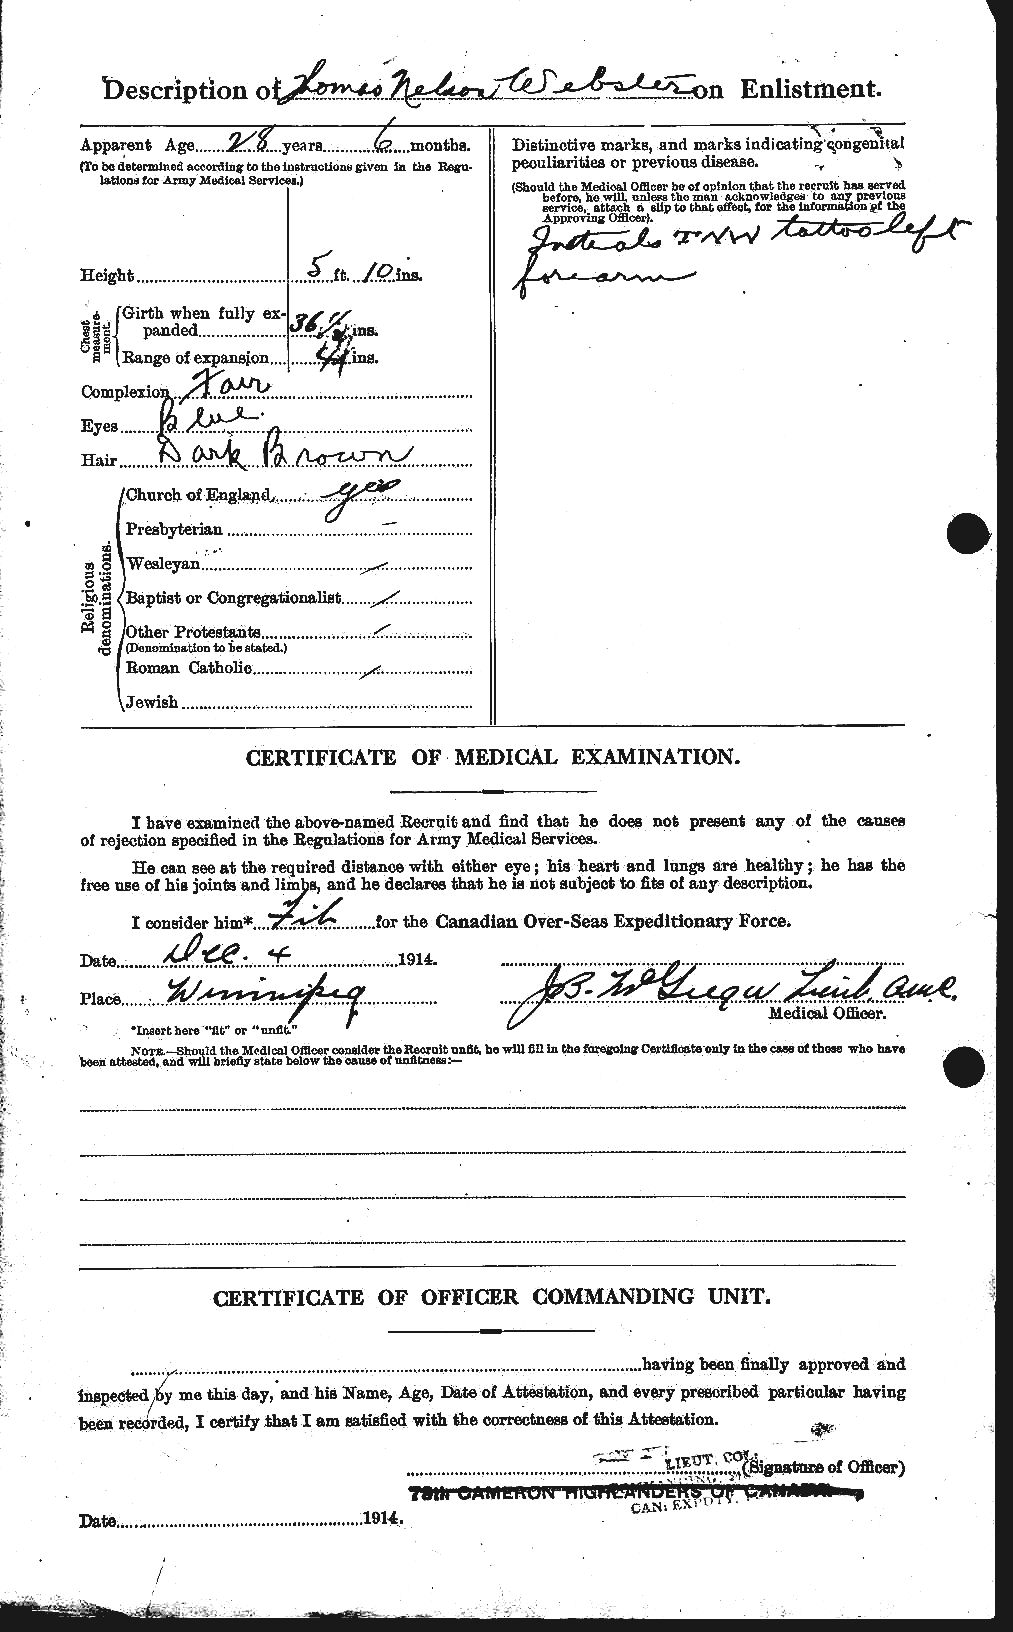 Personnel Records of the First World War - CEF 661995b